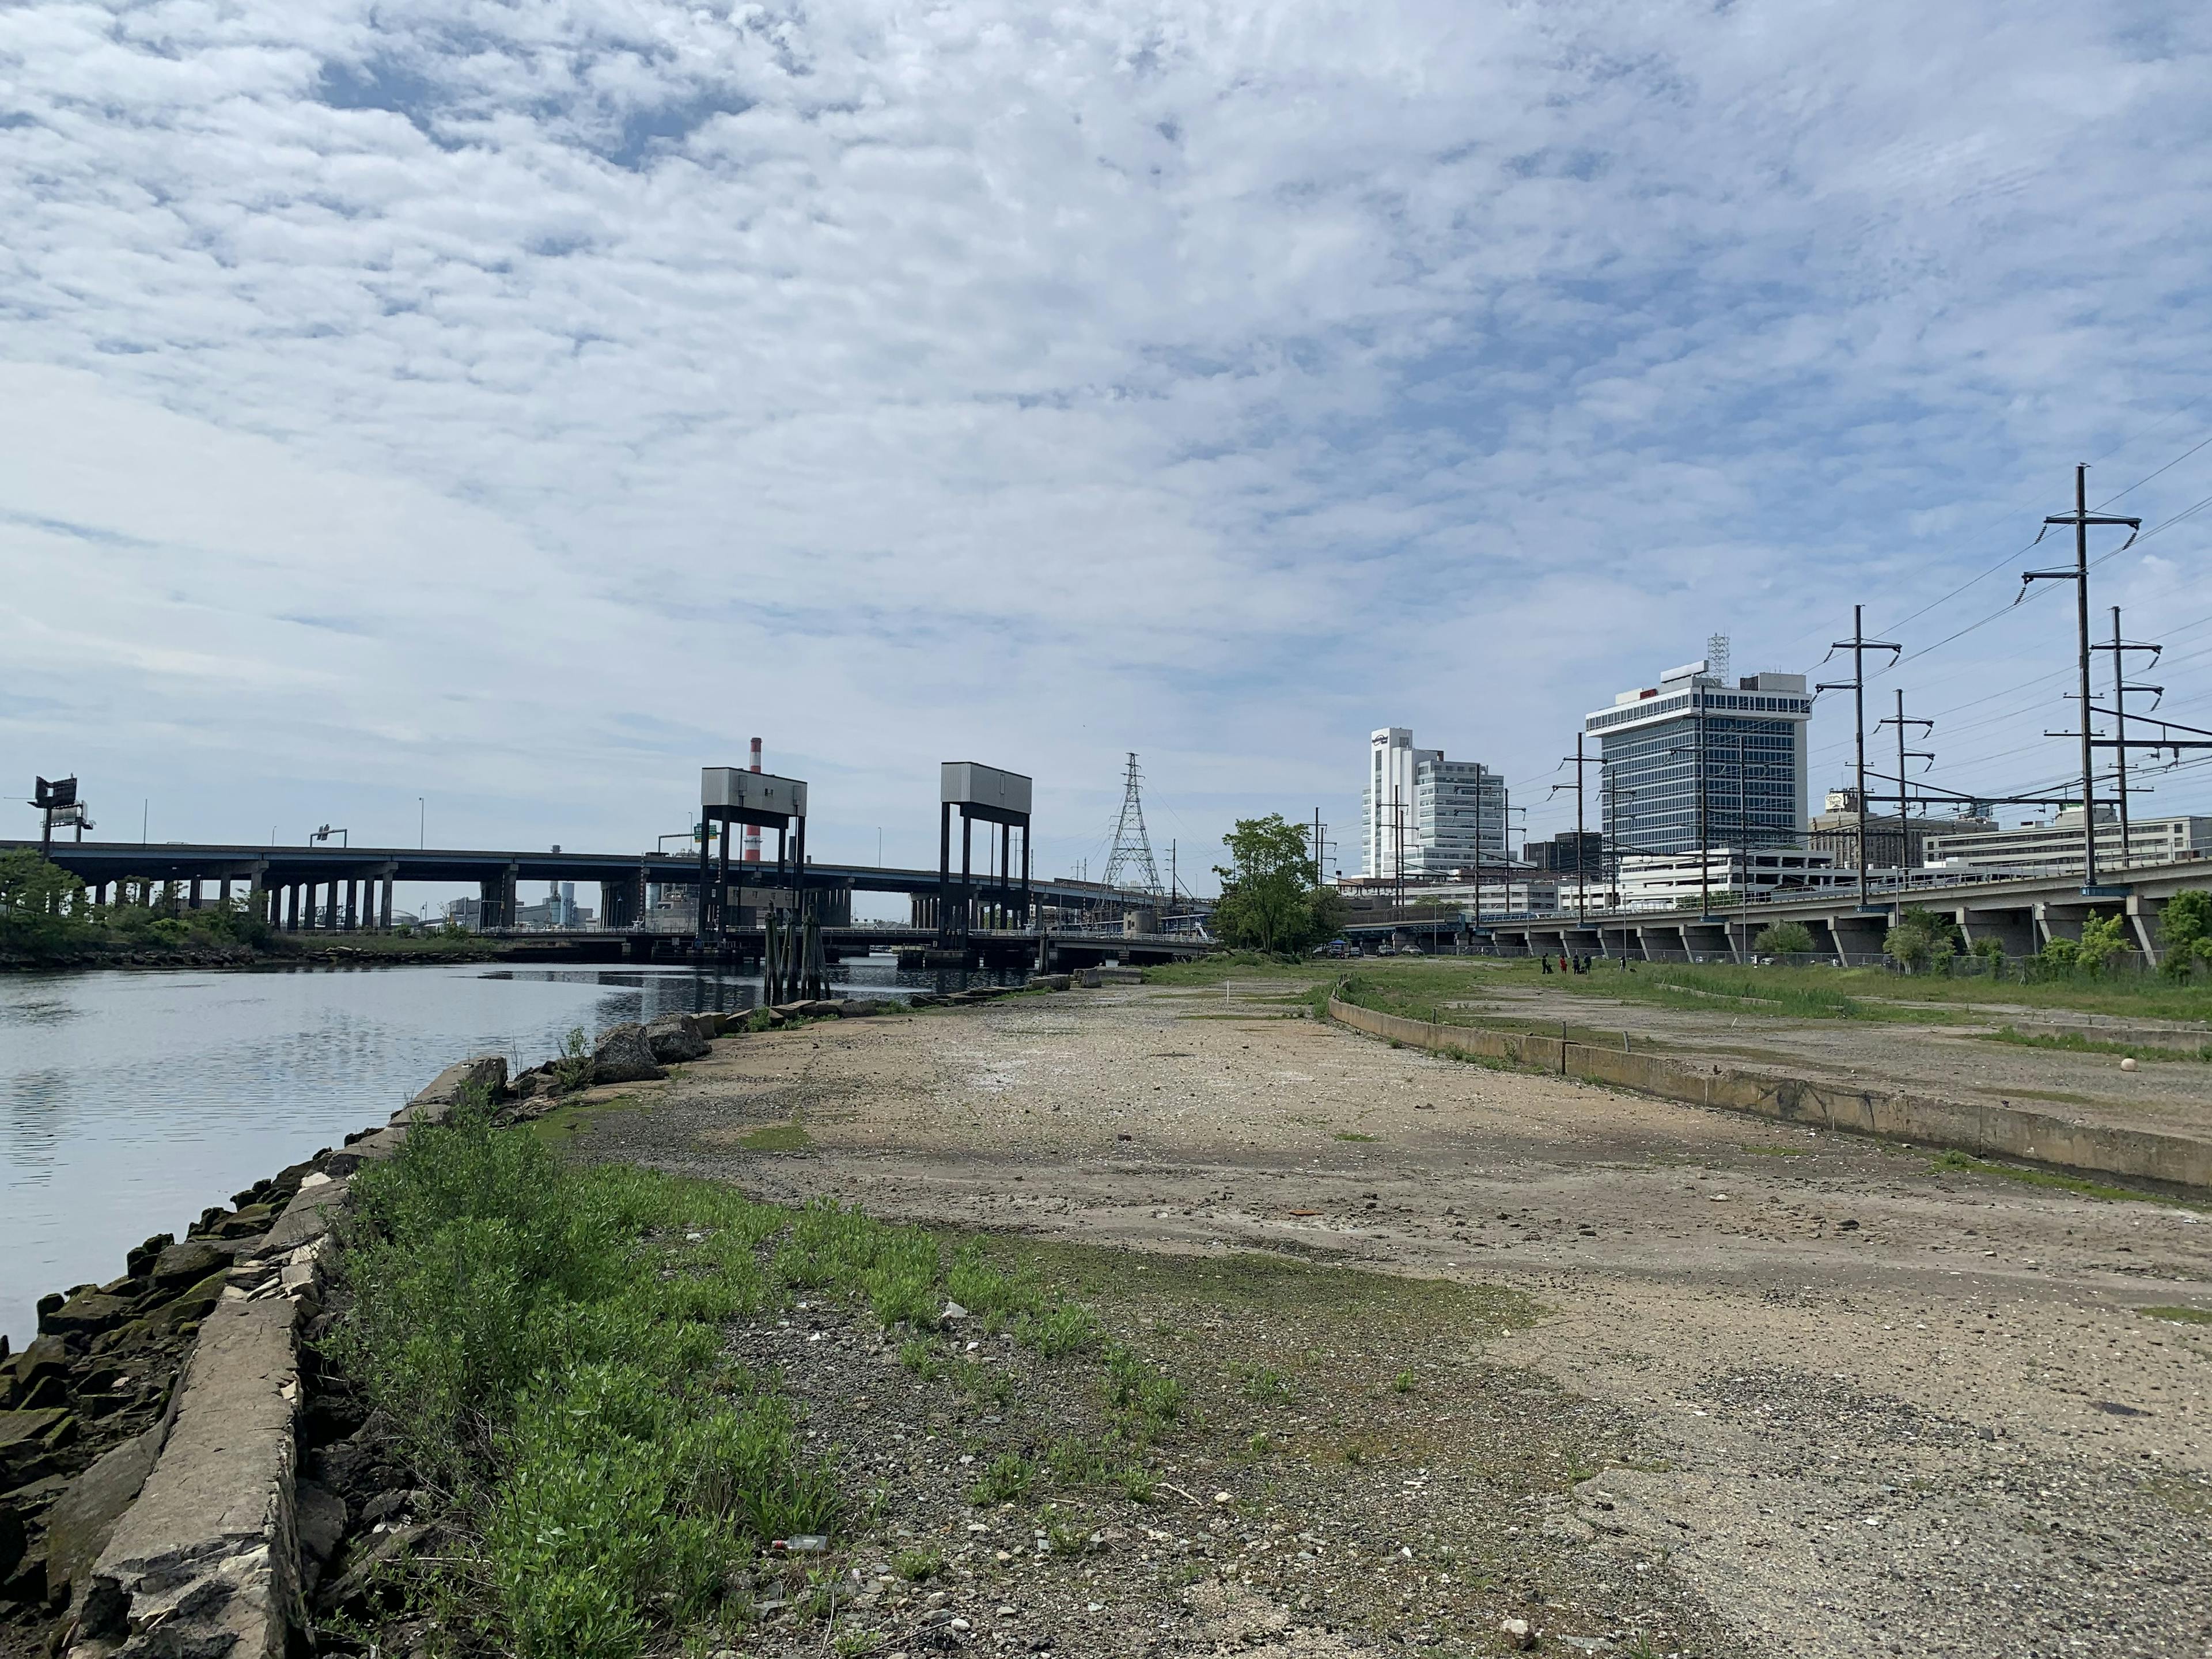 open lot with bridge and buildings in the background